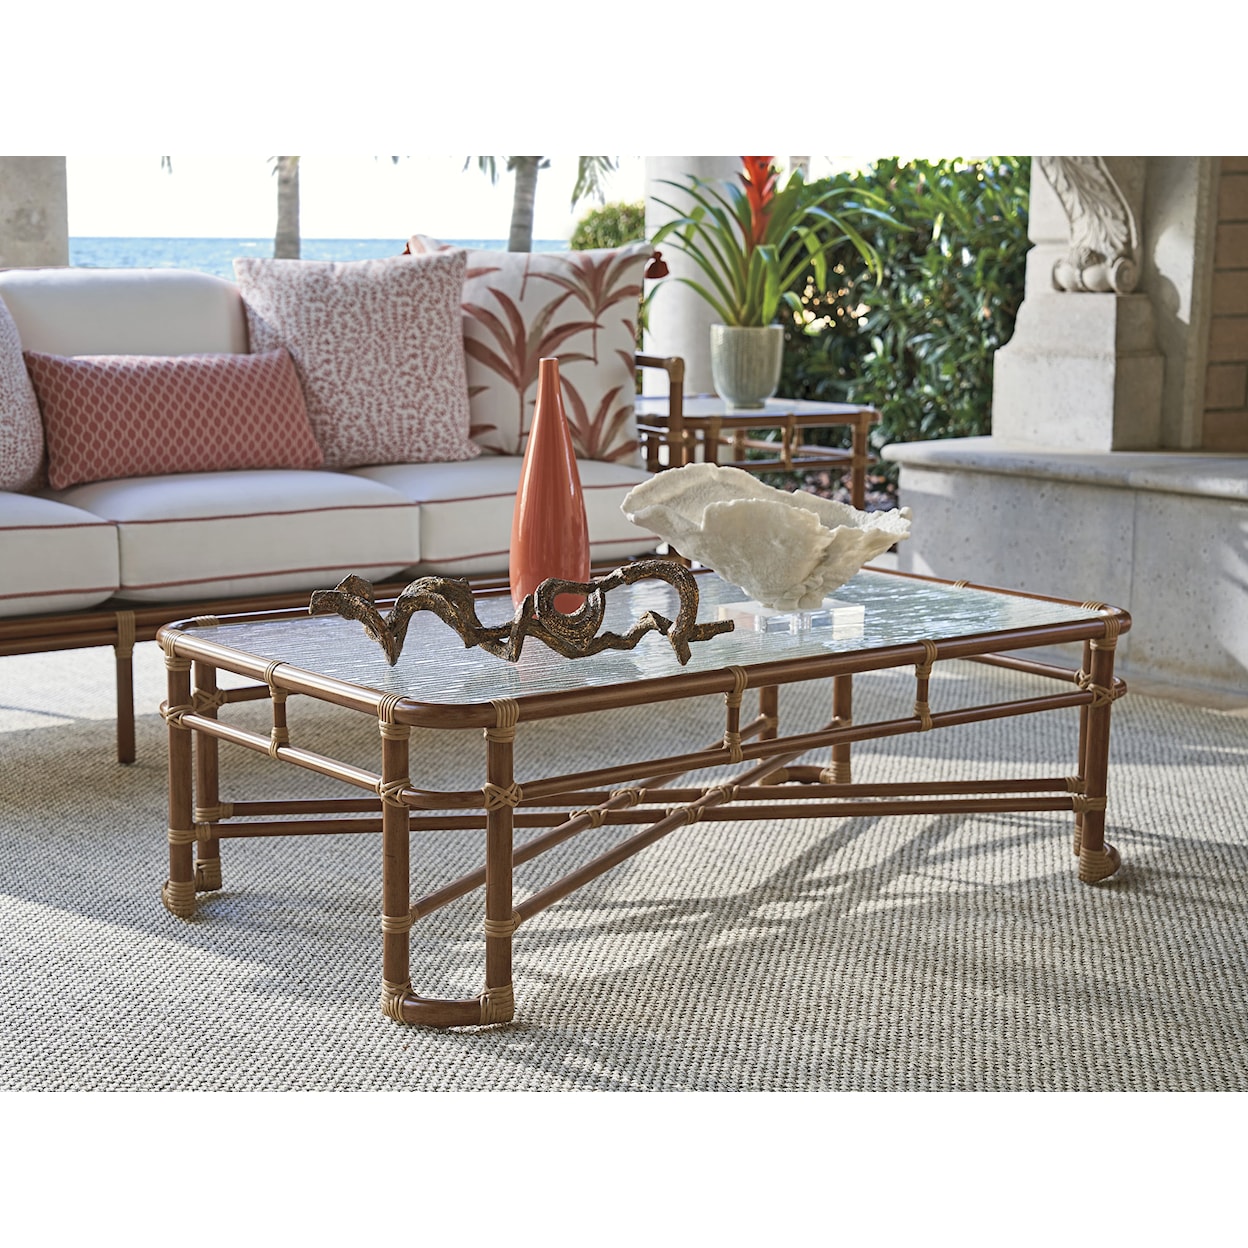 Tommy Bahama Outdoor Living Sandpiper Bay Outdoor Rectangular Cocktail Table